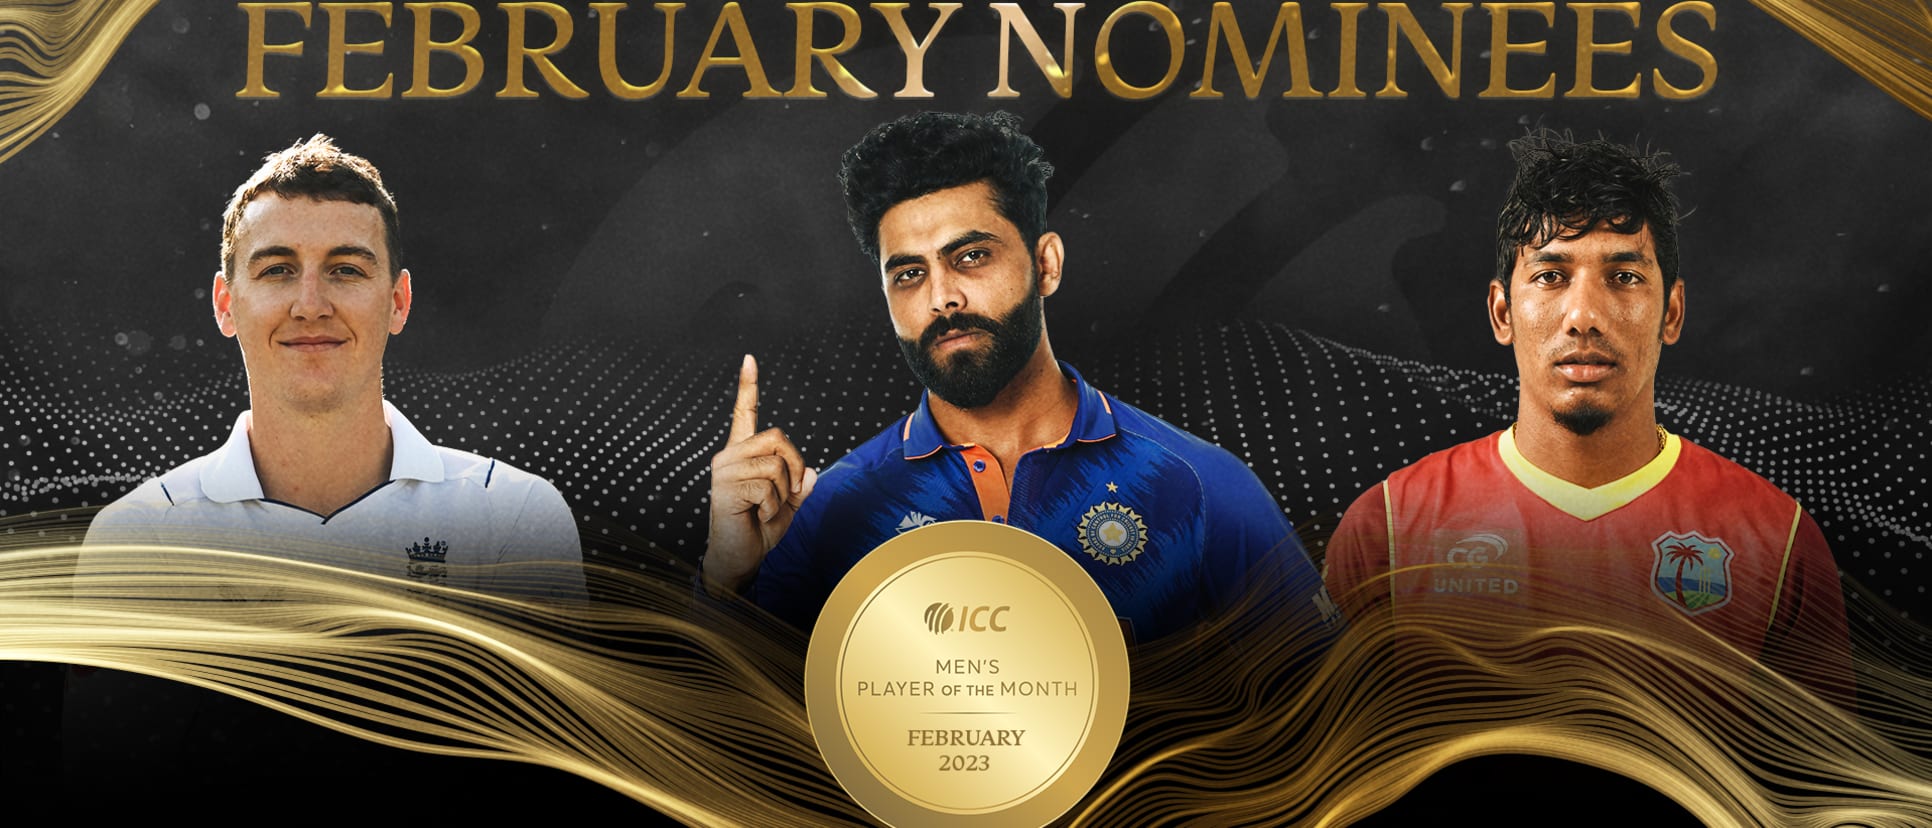 Nominees for ICC Men's Player of the Month for February 2023 revealed